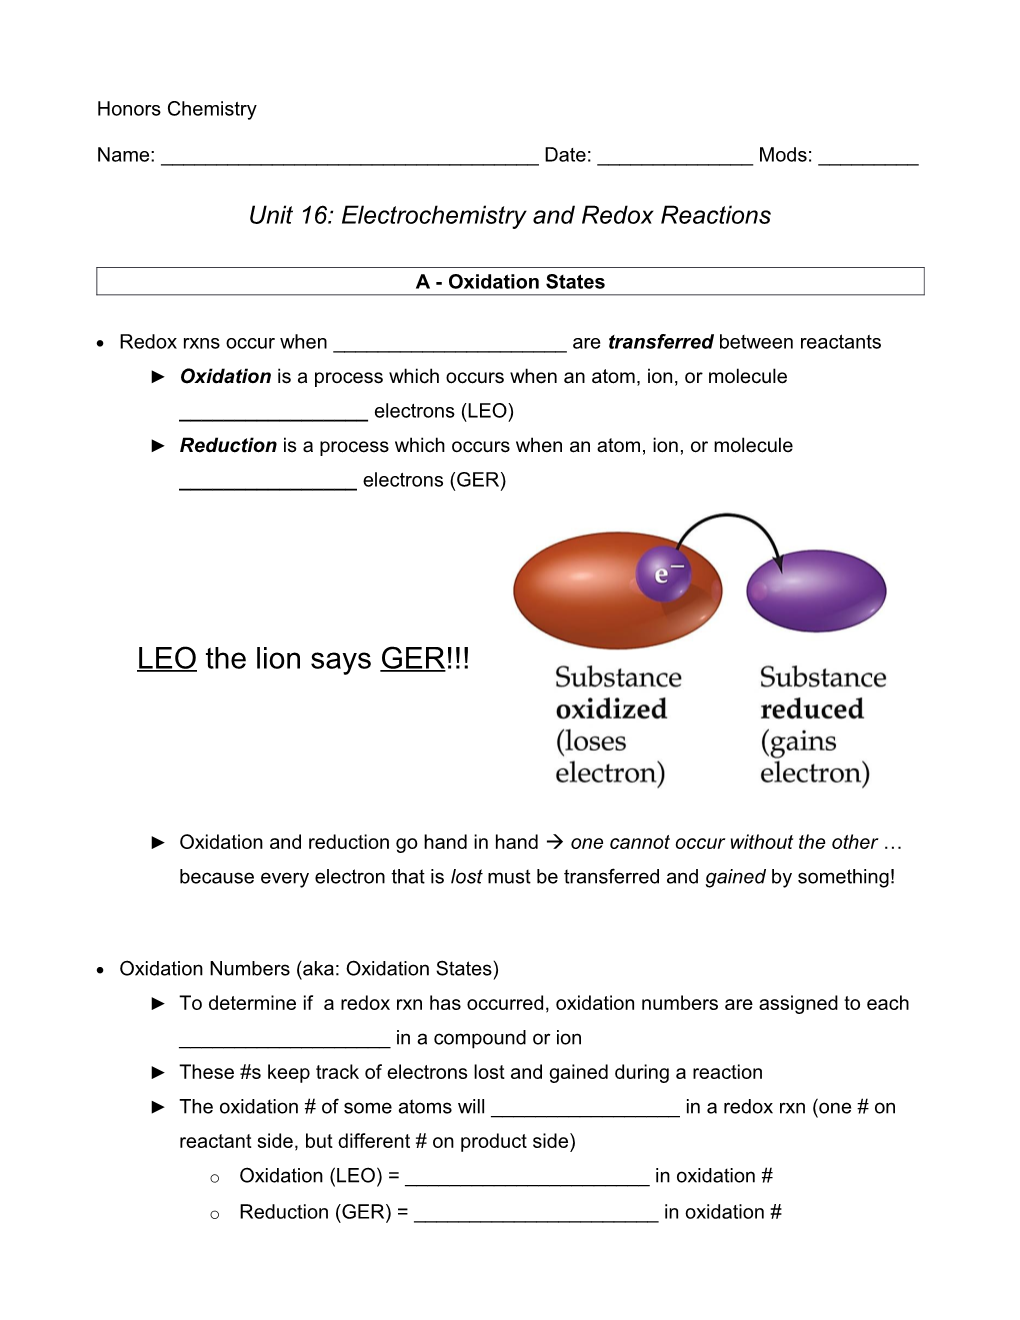 Unit 16: Electrochemistry and Redox Reactions